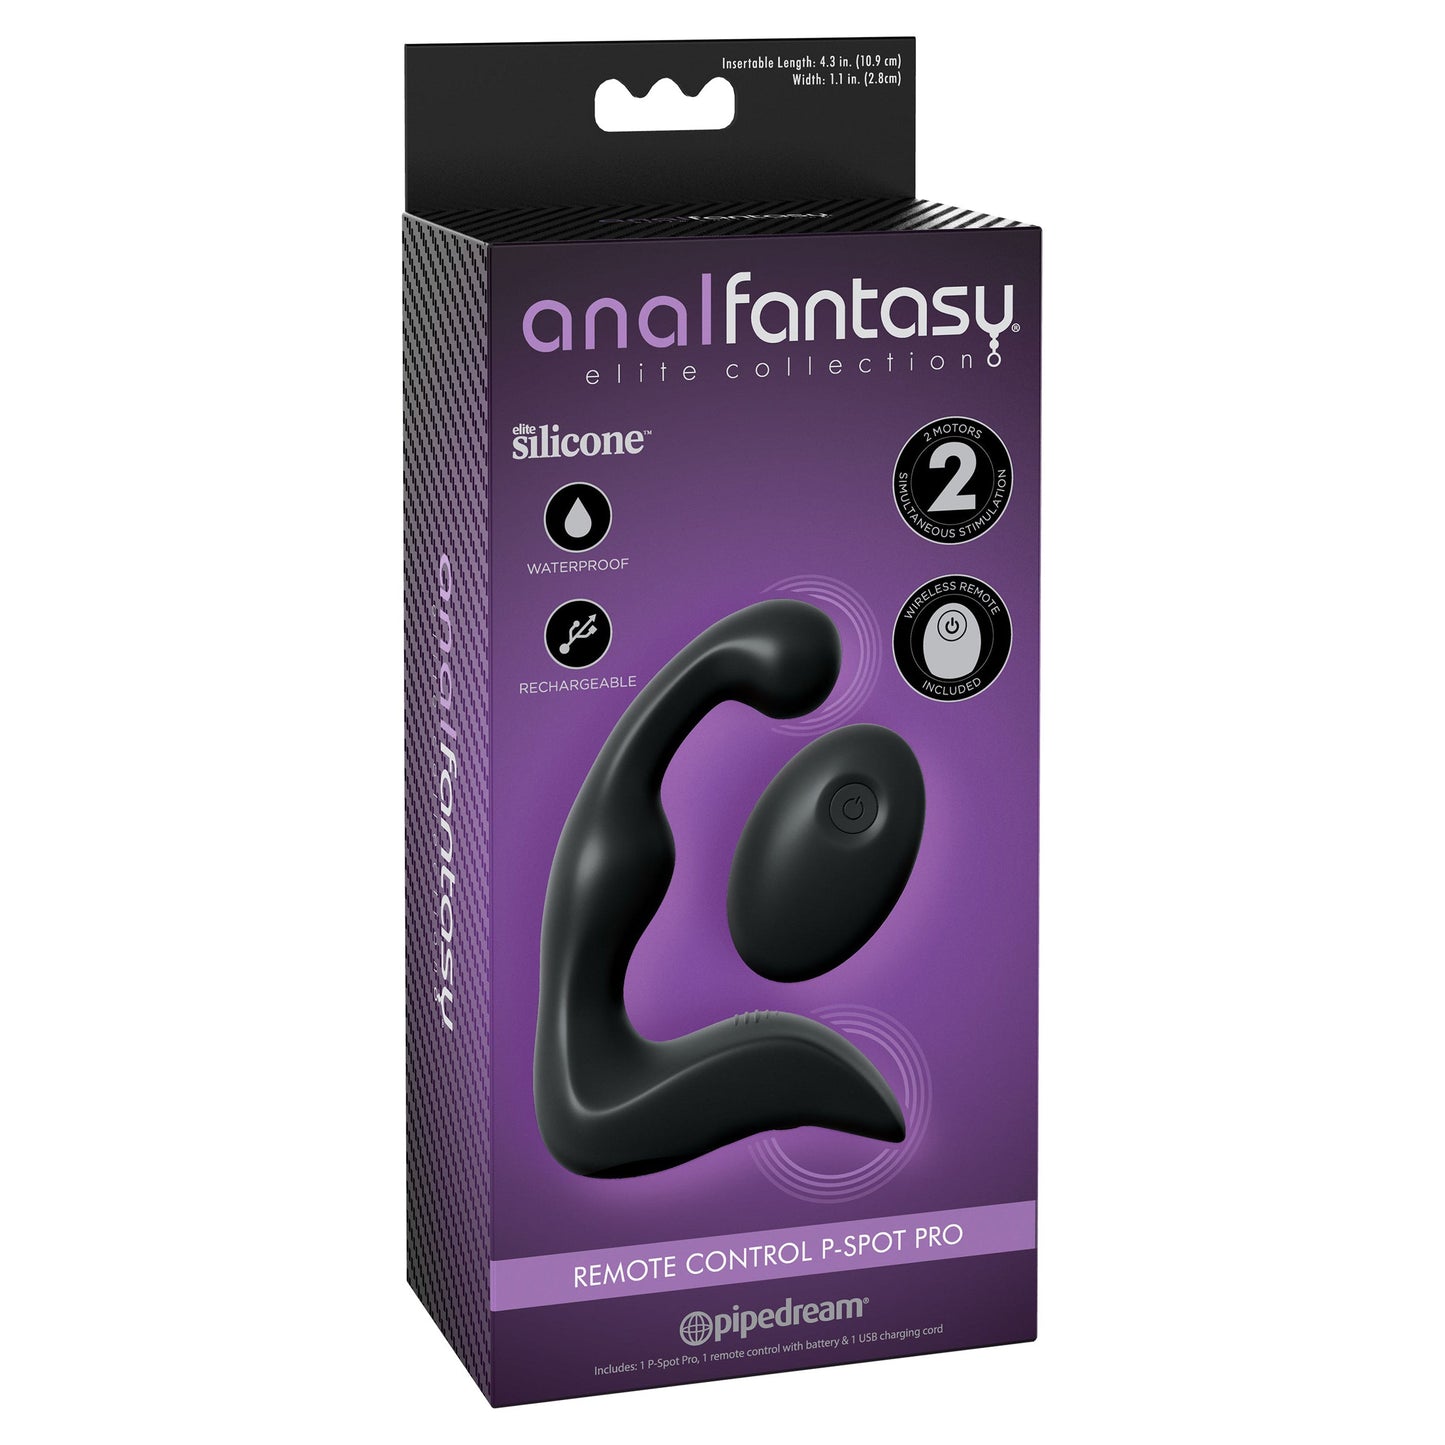 Anal Fantasy Elite Remote Control P-Spot Pro - Black - Thorn & Feather Sex Toy Canada